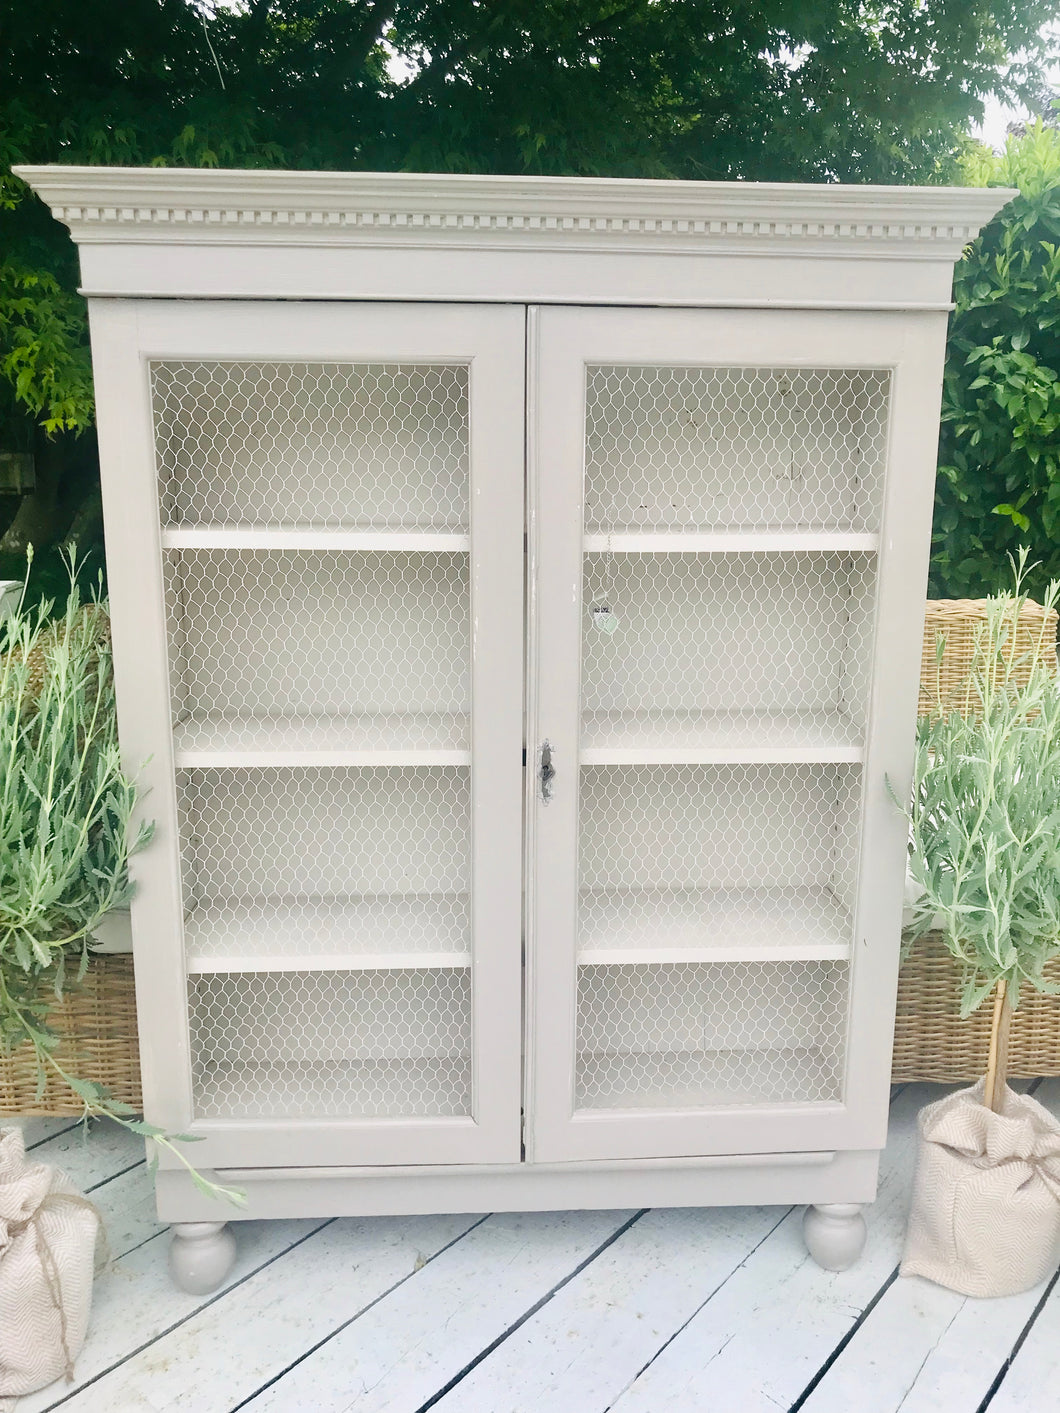 French Style Storage Cabinet Painted in French Grey with Chicken Wire Doors 130 cm H 98 cm W 28cm D